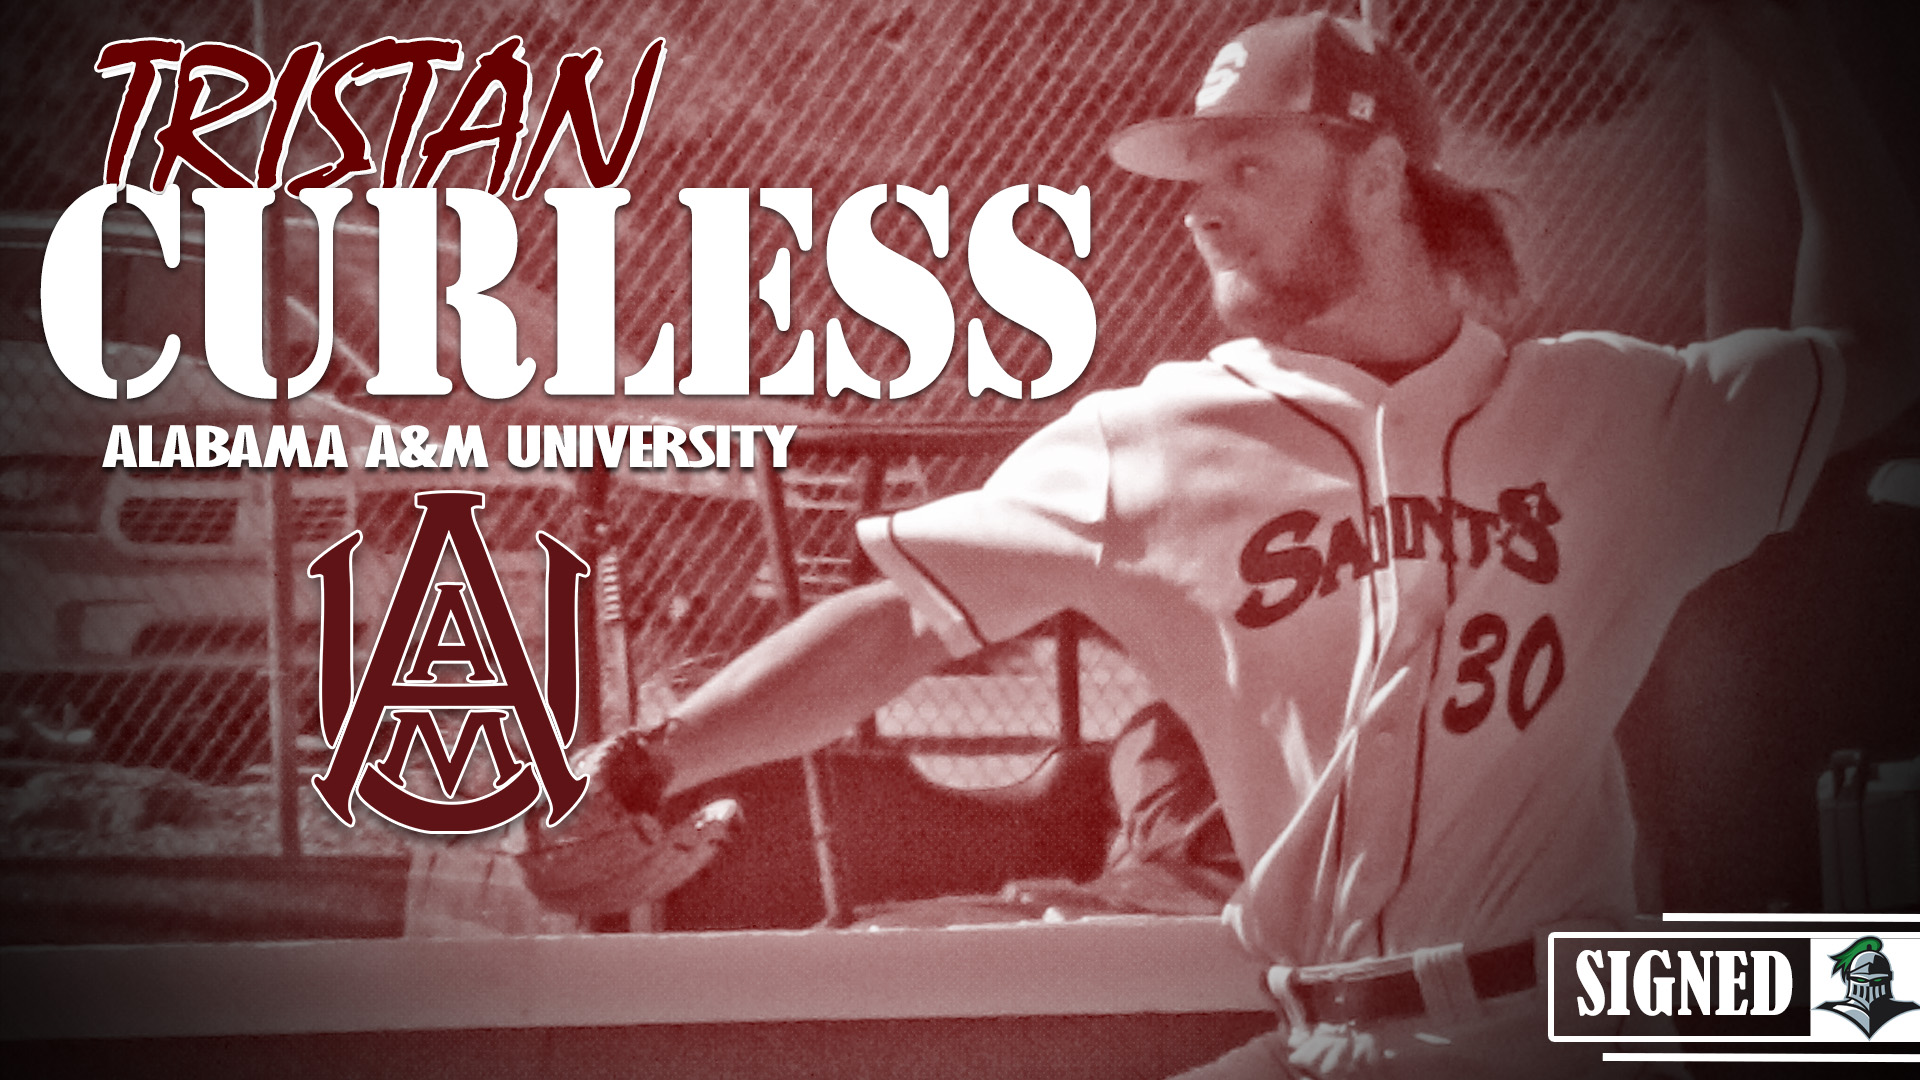 Curless signs with Alabama A&M